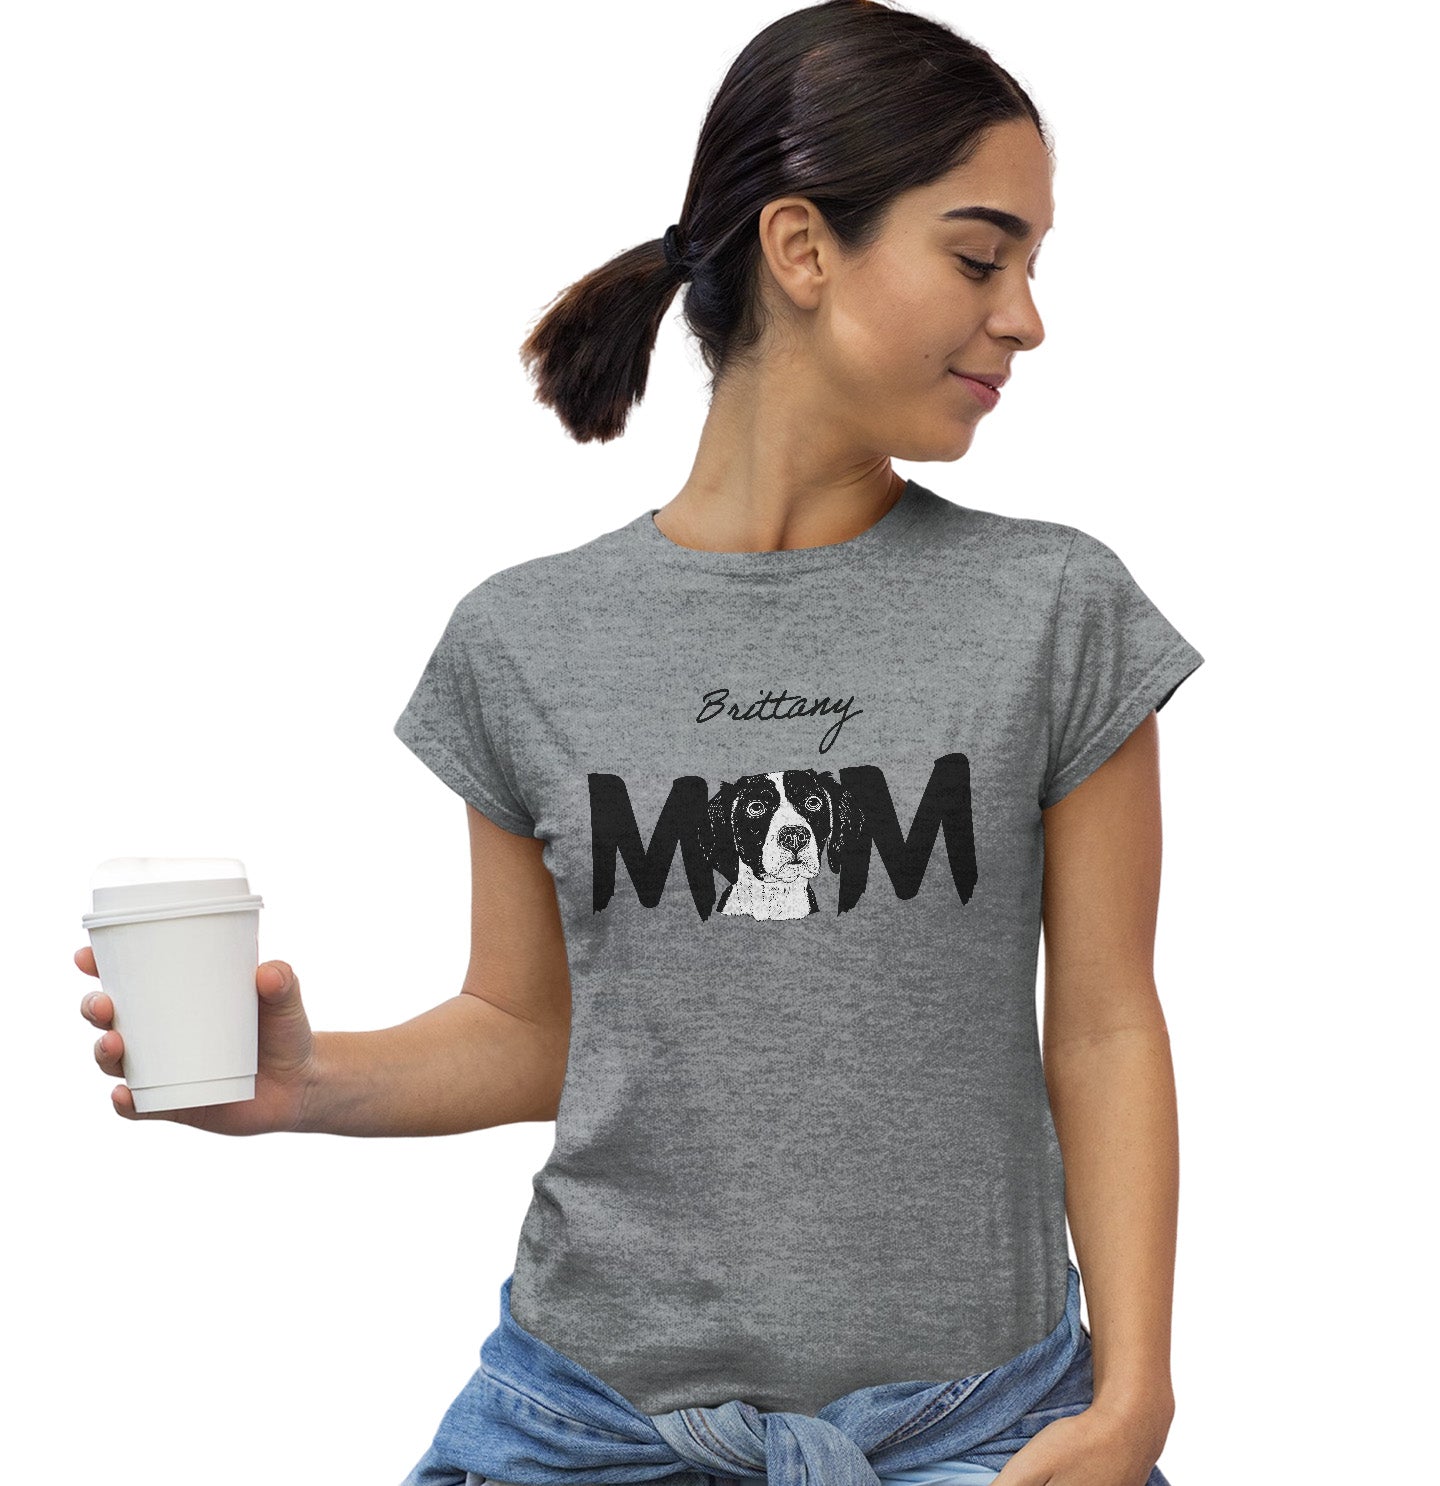 Brittany Breed Mom - Women's Fitted T-Shirt